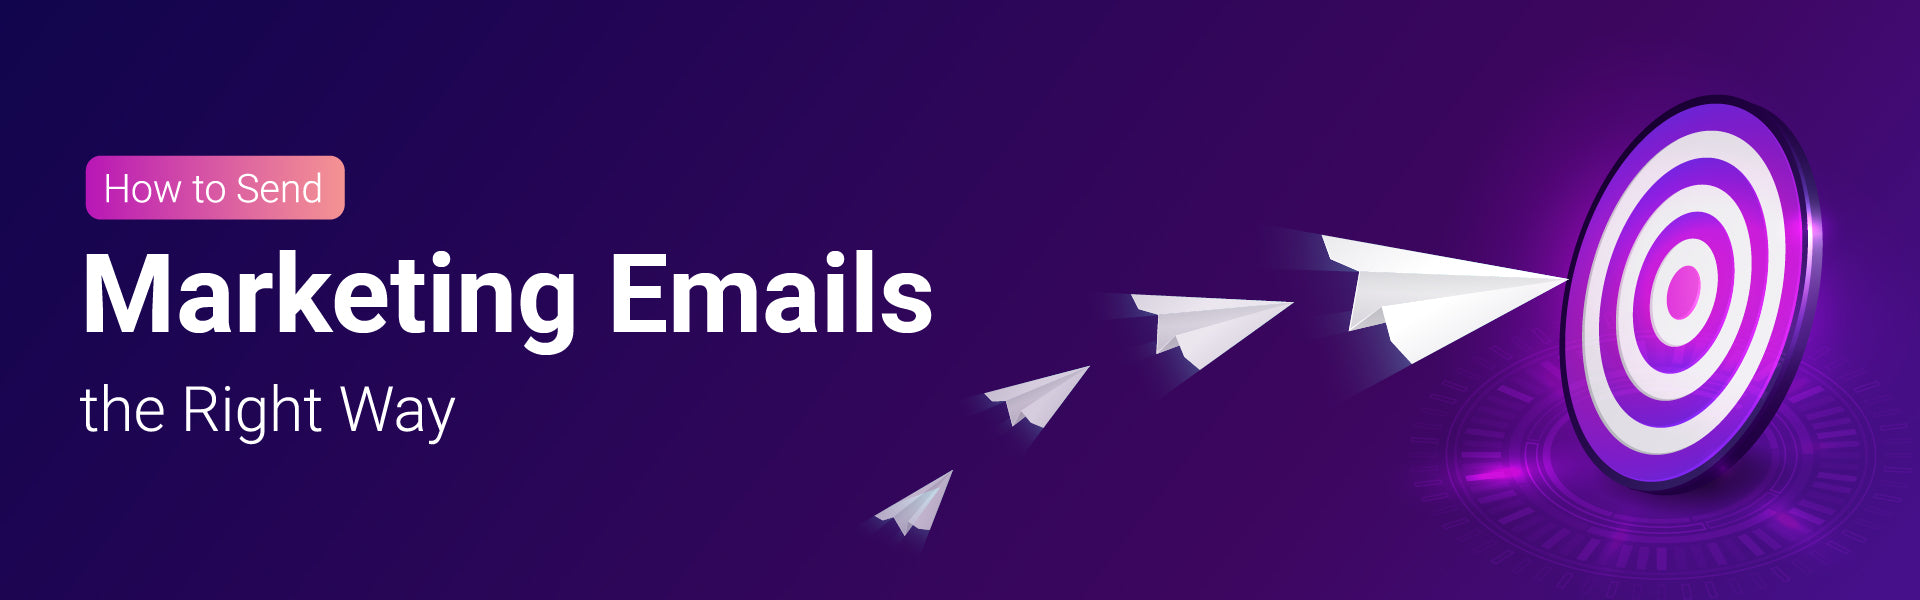 How to Send Marketing Emails the Right Way